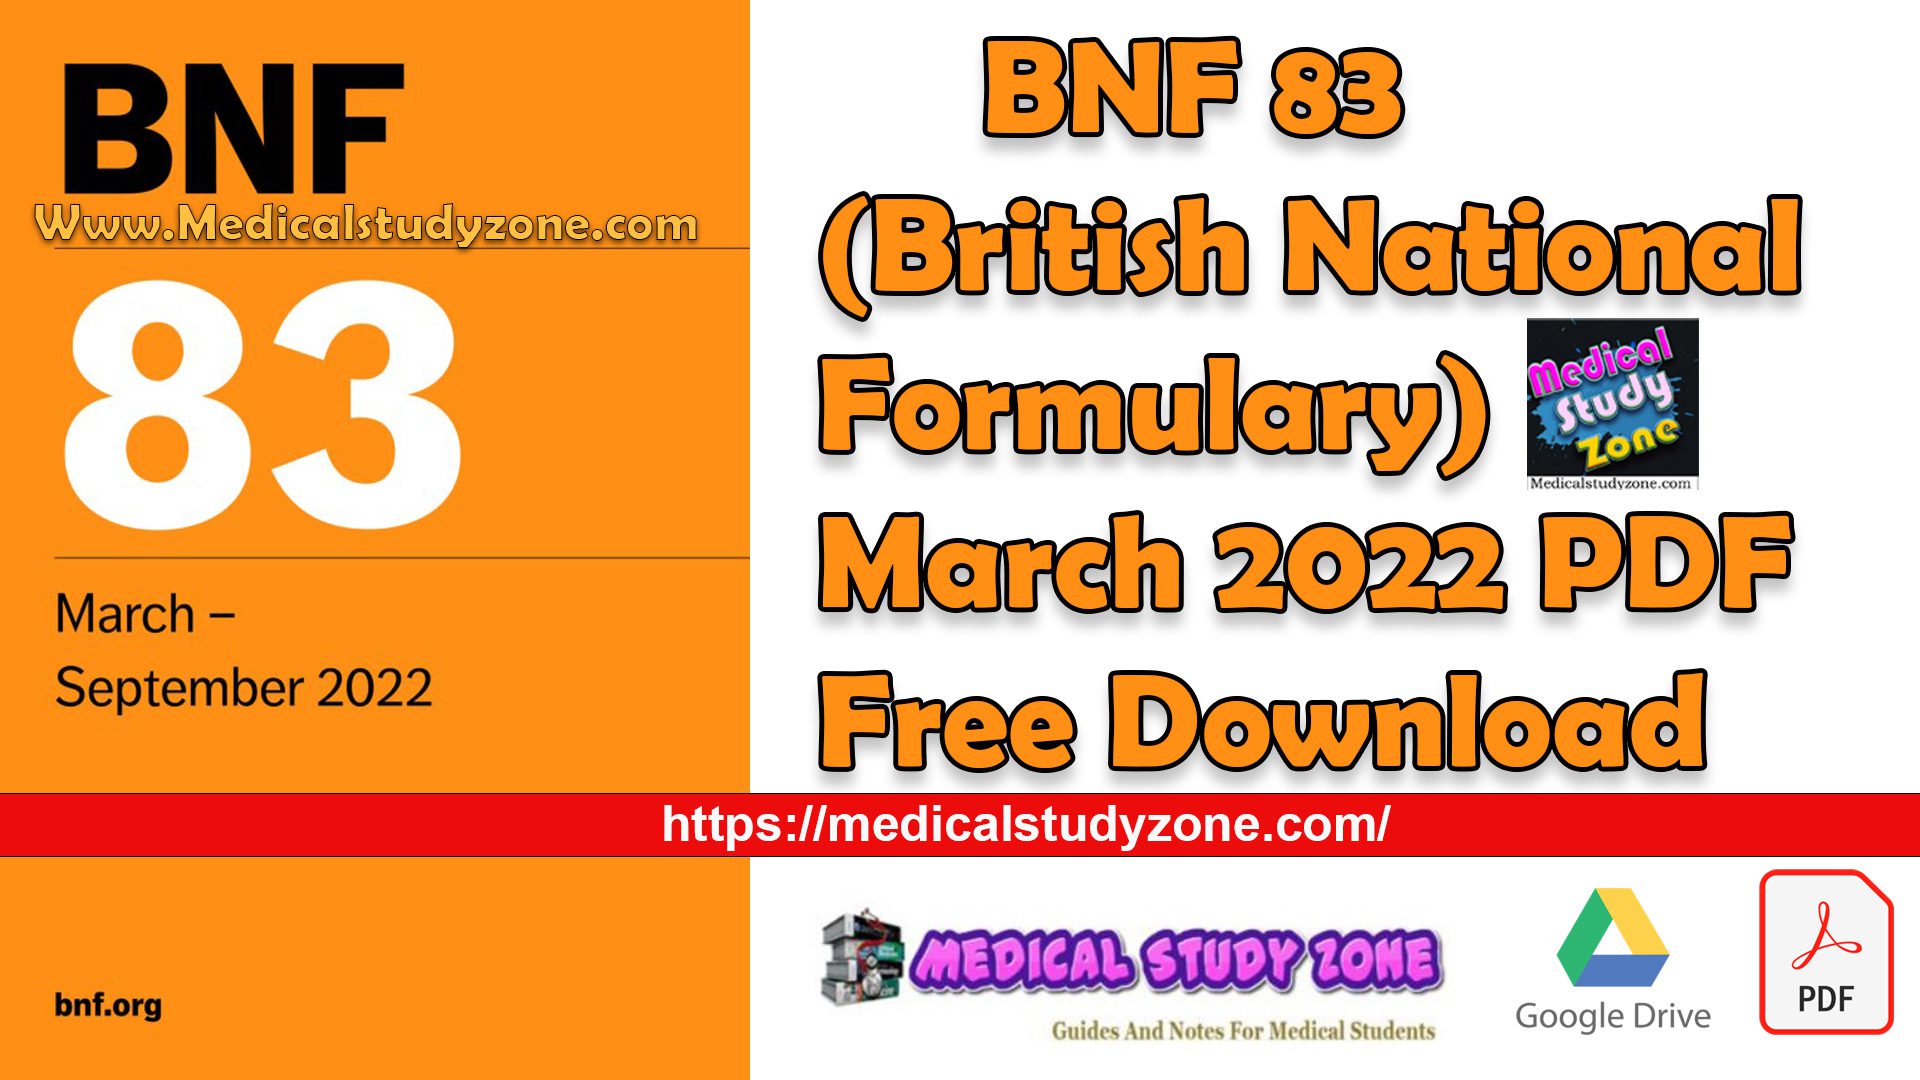 BNF 83 (British National Formulary) March 2022 PDF Free Download